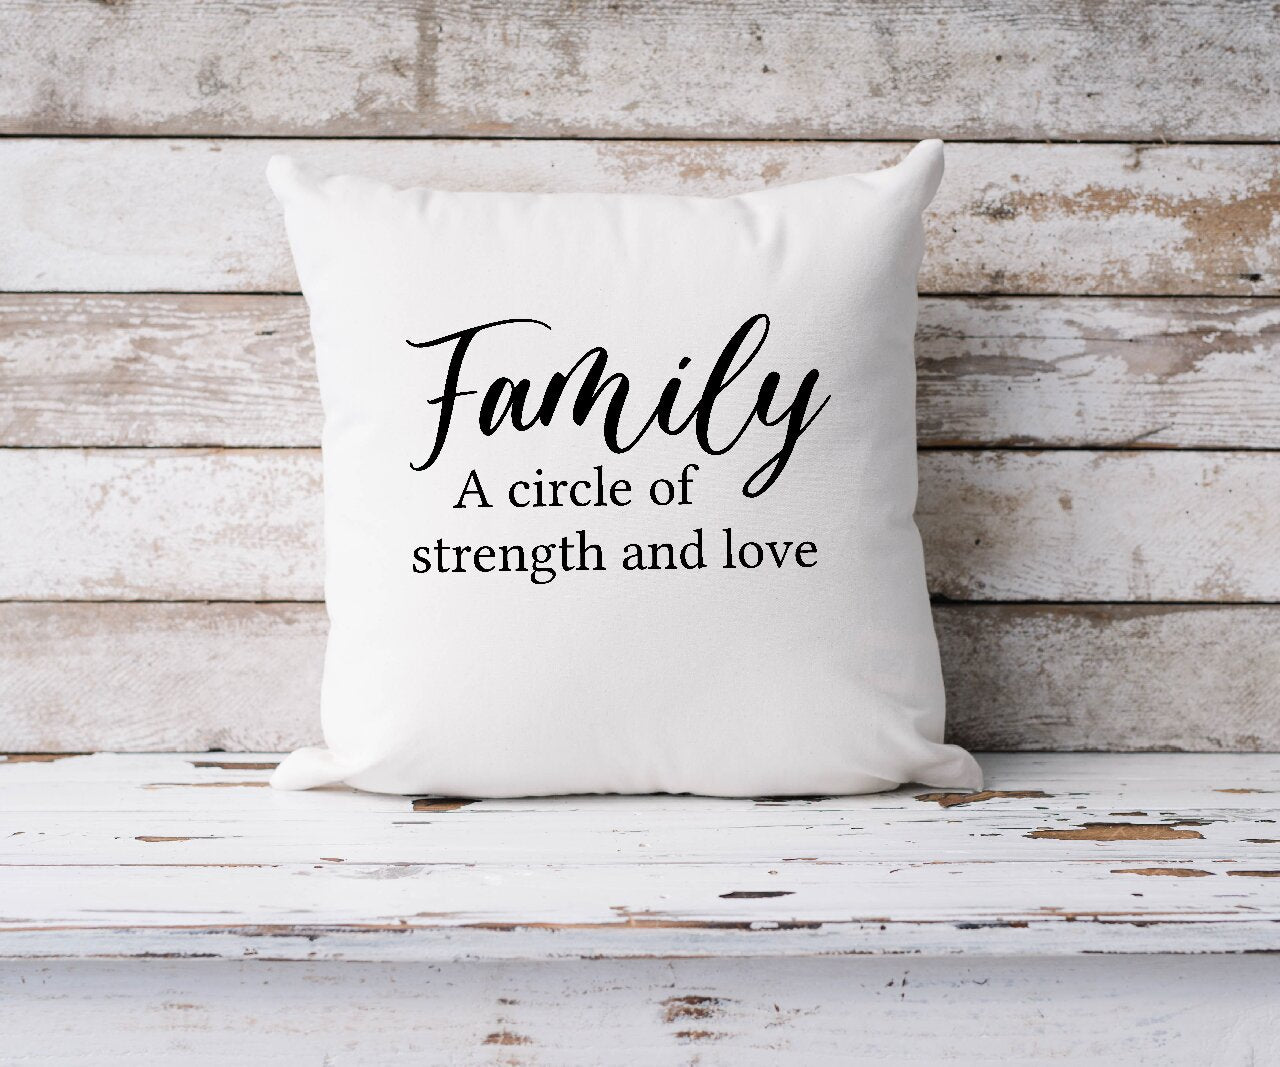 Family Is A Circle Of Strength And Love - Cushion Cover